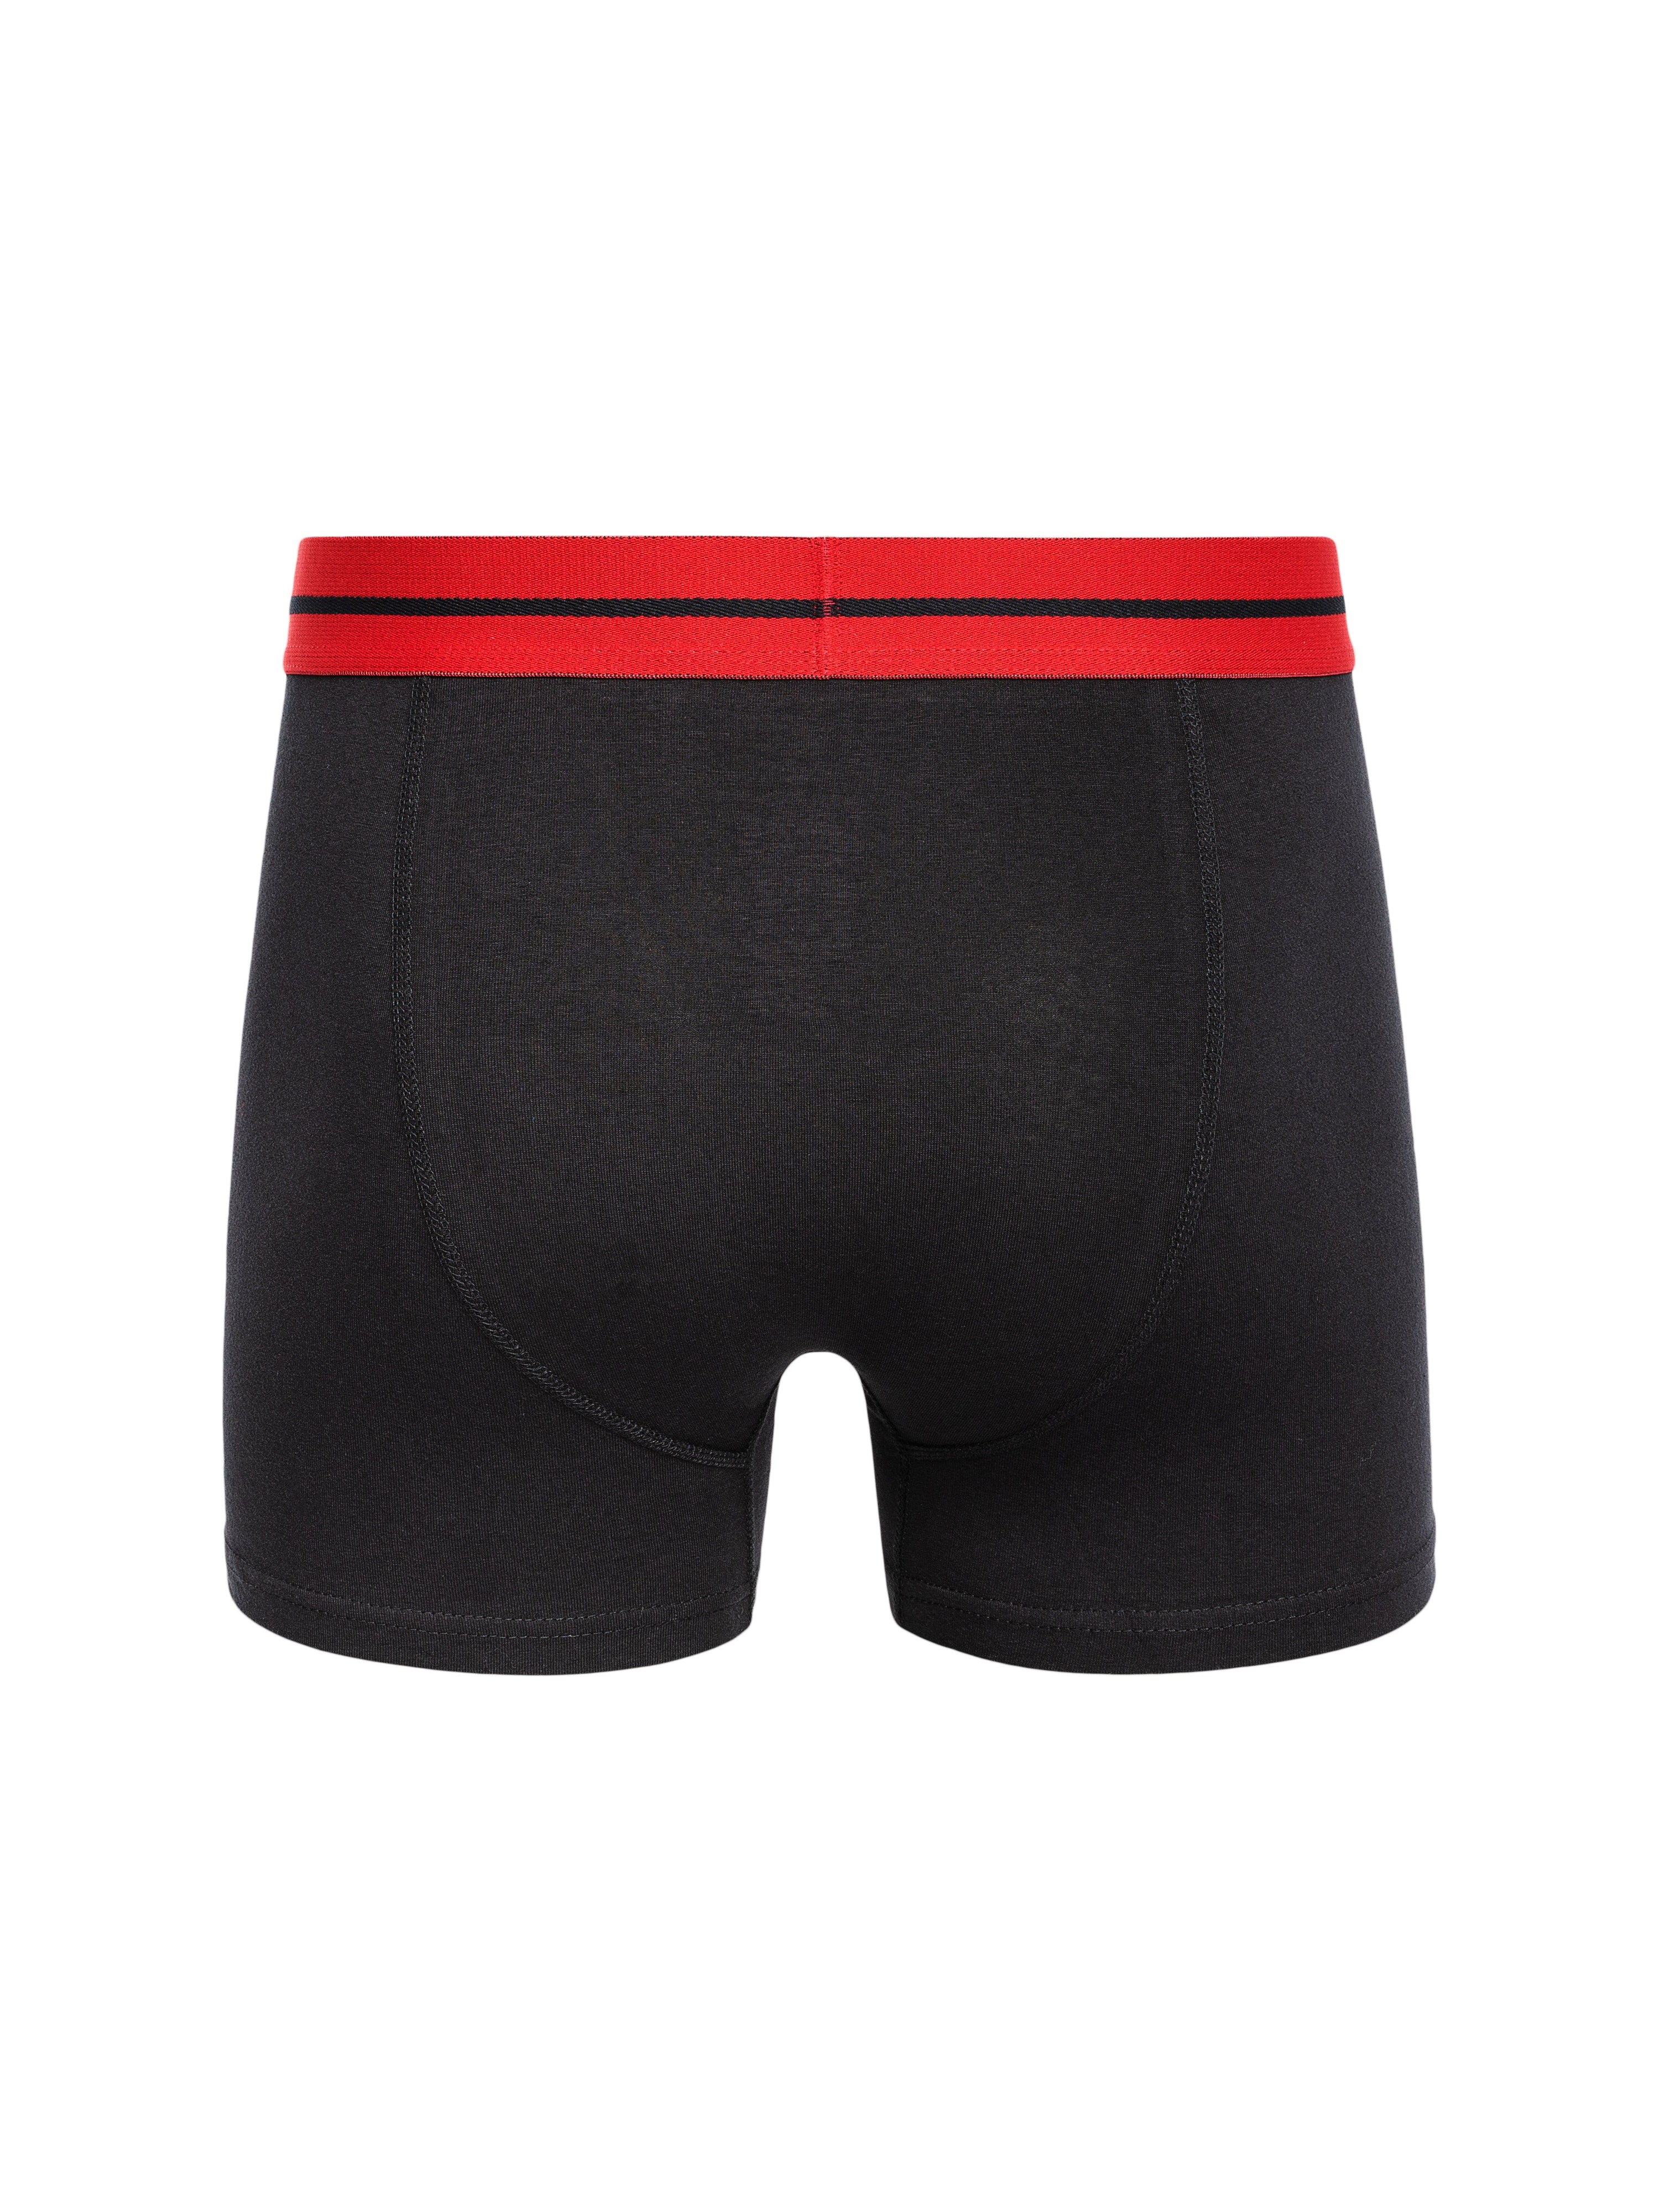 Mens Stamper 2 Boxer Shorts 3pk Black – Duck and Cover